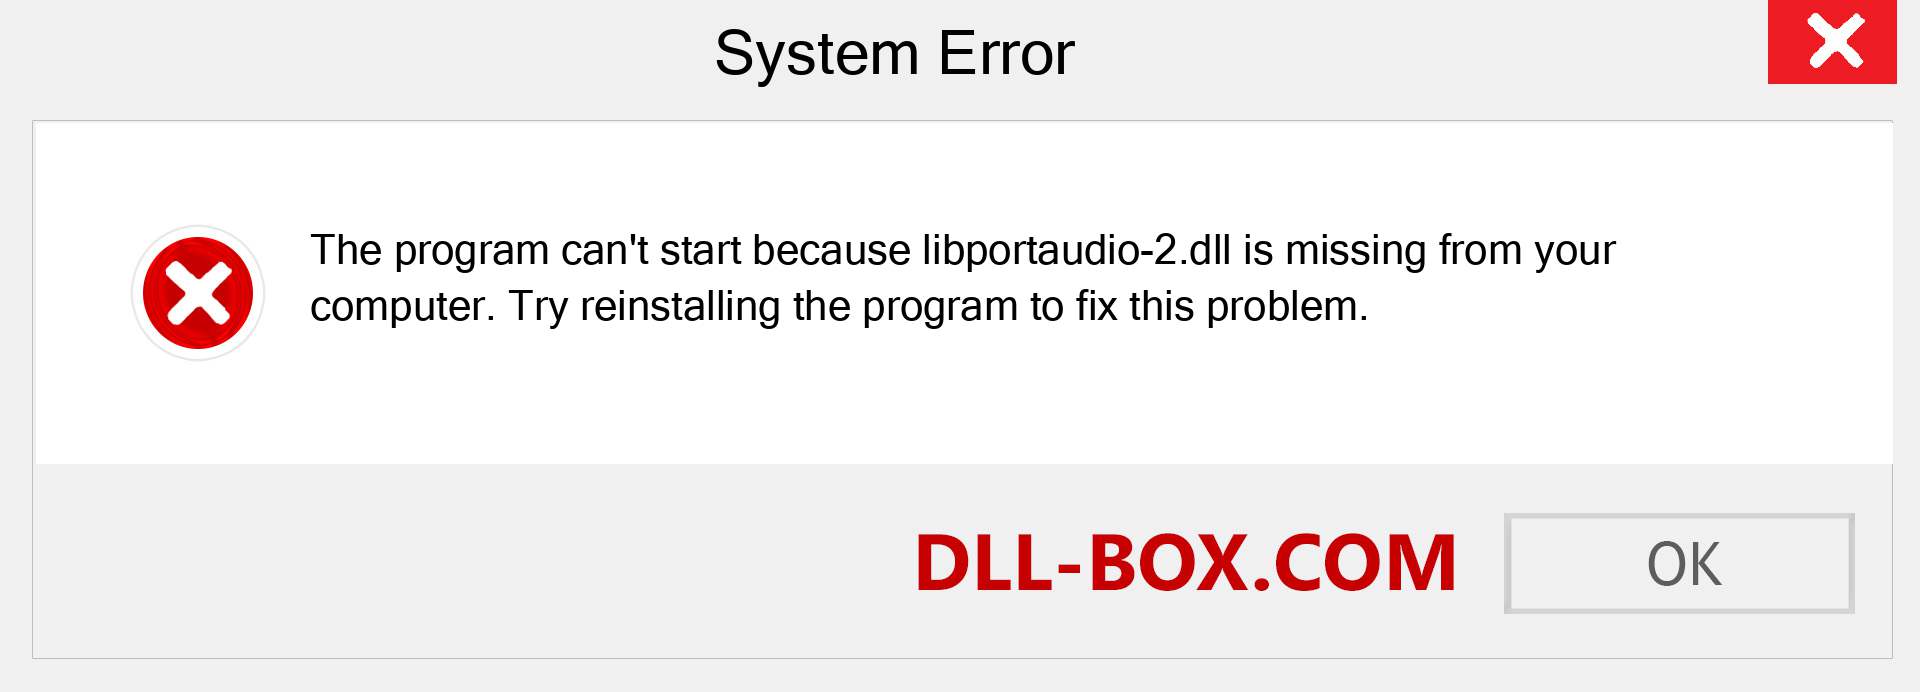  libportaudio-2.dll file is missing?. Download for Windows 7, 8, 10 - Fix  libportaudio-2 dll Missing Error on Windows, photos, images